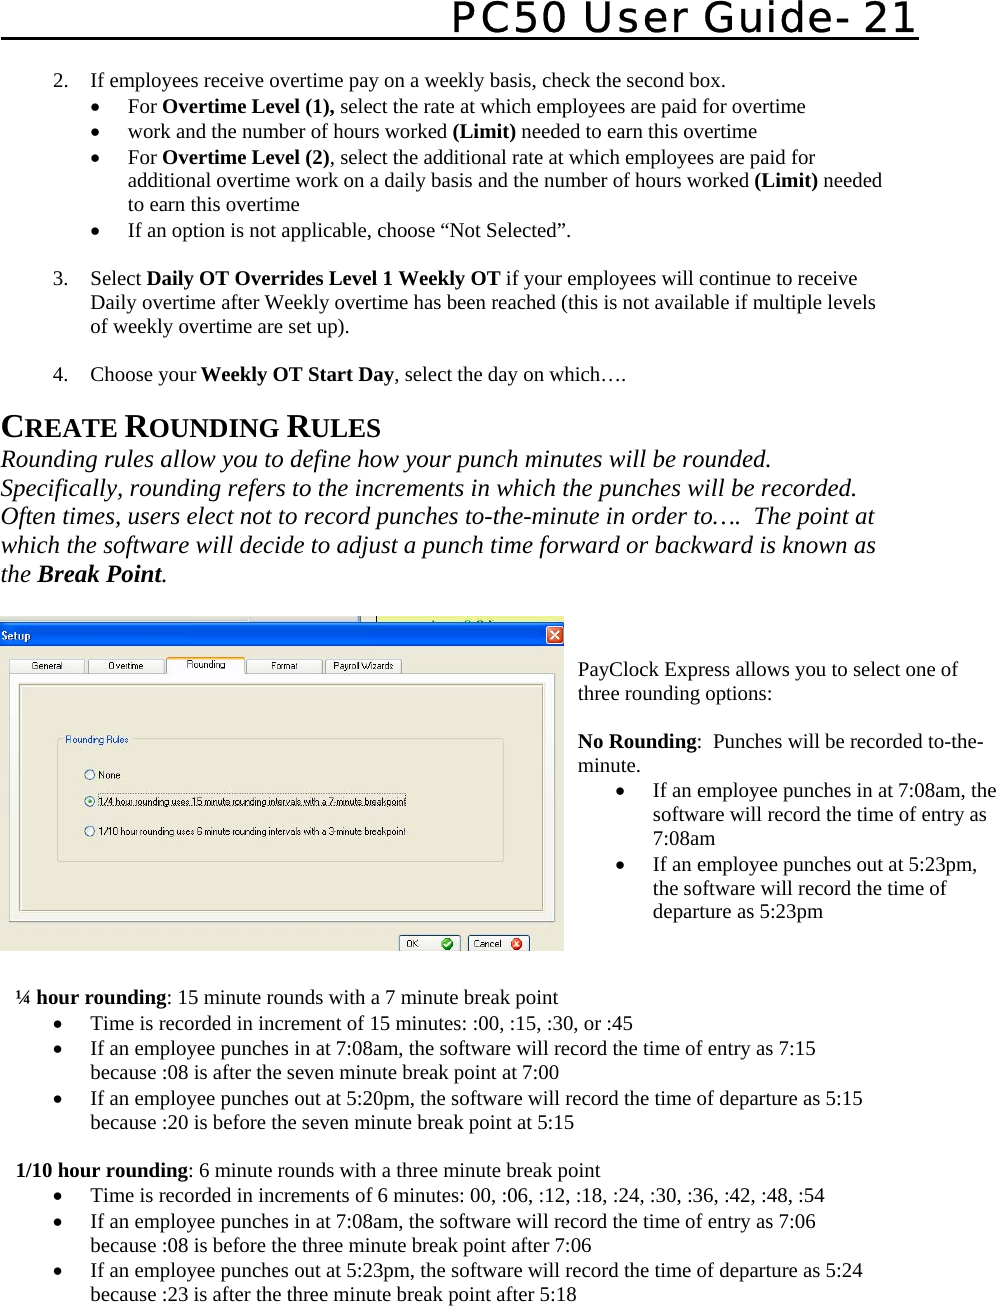   PC50 User Guide- 21            CREATE ROUNDING RULES  Rounding rules allow you to define how your punch minutes will be rounded.  Specifically, rounding refers to the increments in which the punches will be recorded.  Often times, users elect not to record punches to-the-minute in order to….  The point at which the software will decide to adjust a punch time forward or backward is known as the Break Point.      2. If employees receive overtime pay on a weekly basis, check the second box.   • For Overtime Level (1), select the rate at which employees are paid for overtime • work and the number of hours worked (Limit) needed to earn this overtime • For Overtime Level (2), select the additional rate at which employees are paid for additional overtime work on a daily basis and the number of hours worked (Limit) needed to earn this overtime • If an option is not applicable, choose “Not Selected”.  3. Select Daily OT Overrides Level 1 Weekly OT if your employees will continue to receive Daily overtime after Weekly overtime has been reached (this is not available if multiple levels of weekly overtime are set up).  4. Choose your Weekly OT Start Day, select the day on which….   ¼ hour rounding: 15 minute rounds with a 7 minute break point • Time is recorded in increment of 15 minutes: :00, :15, :30, or :45 • If an employee punches in at 7:08am, the software will record the time of entry as 7:15 because :08 is after the seven minute break point at 7:00 • If an employee punches out at 5:20pm, the software will record the time of departure as 5:15 because :20 is before the seven minute break point at 5:15  1/10 hour rounding: 6 minute rounds with a three minute break point • Time is recorded in increments of 6 minutes: 00, :06, :12, :18, :24, :30, :36, :42, :48, :54 • If an employee punches in at 7:08am, the software will record the time of entry as 7:06 because :08 is before the three minute break point after 7:06 • If an employee punches out at 5:23pm, the software will record the time of departure as 5:24 because :23 is after the three minute break point after 5:18 PayClock Express allows you to select one of three rounding options:  No Rounding:  Punches will be recorded to-the-minute. • If an employee punches in at 7:08am, the software will record the time of entry as 7:08am • If an employee punches out at 5:23pm, the software will record the time of departure as 5:23pm 